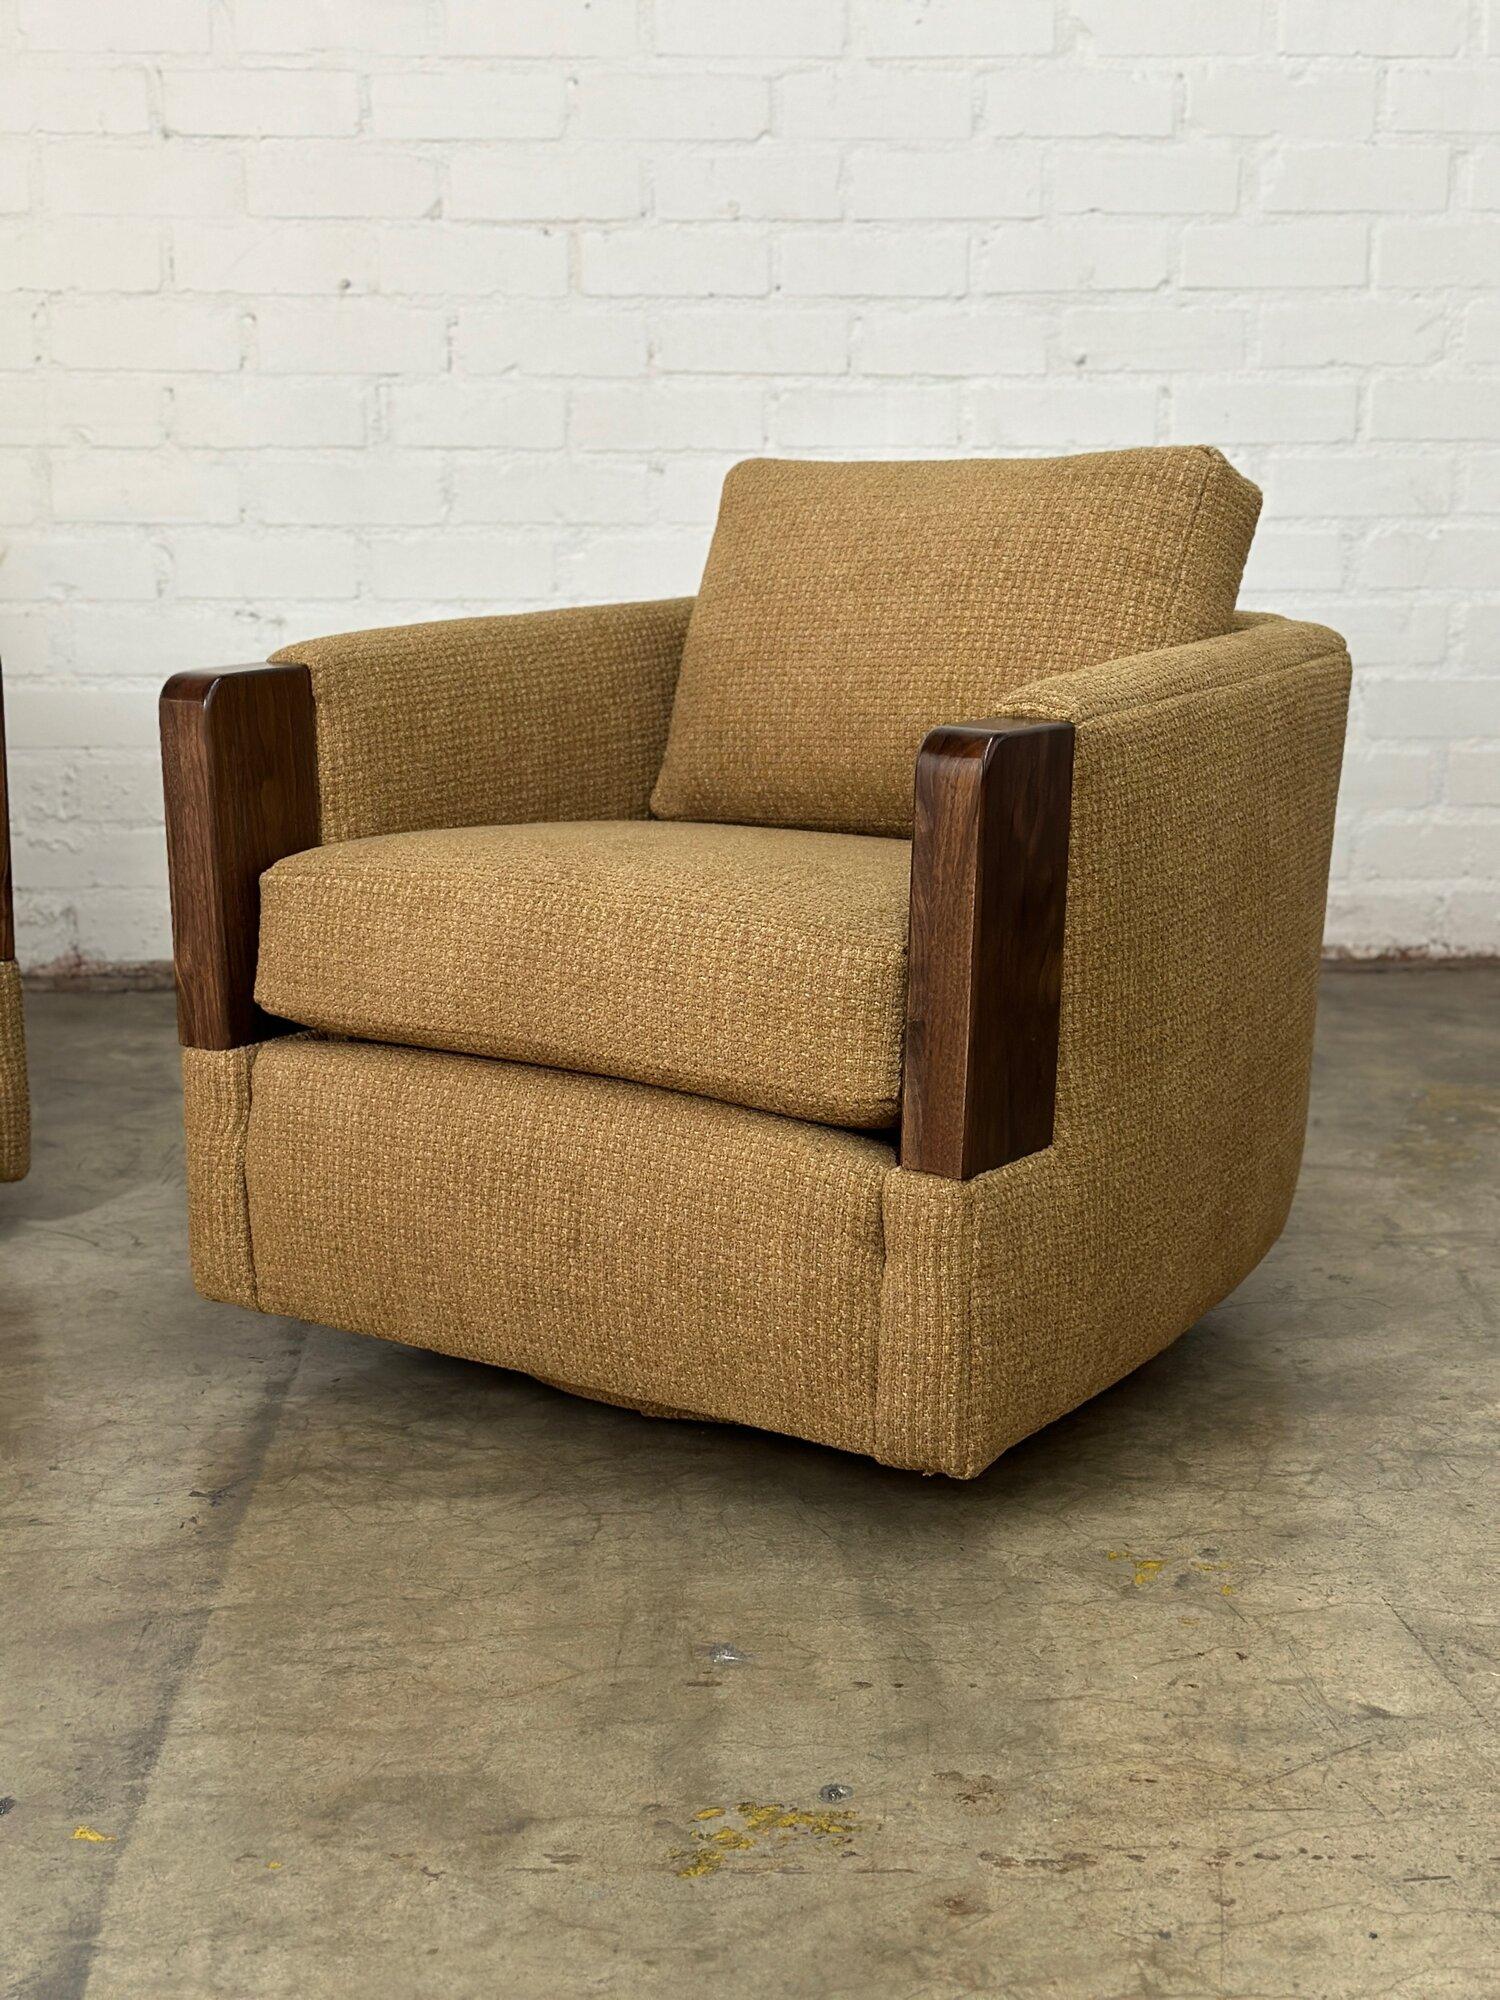 Vintage custom swivel chairs -pair In Good Condition For Sale In Los Angeles, CA